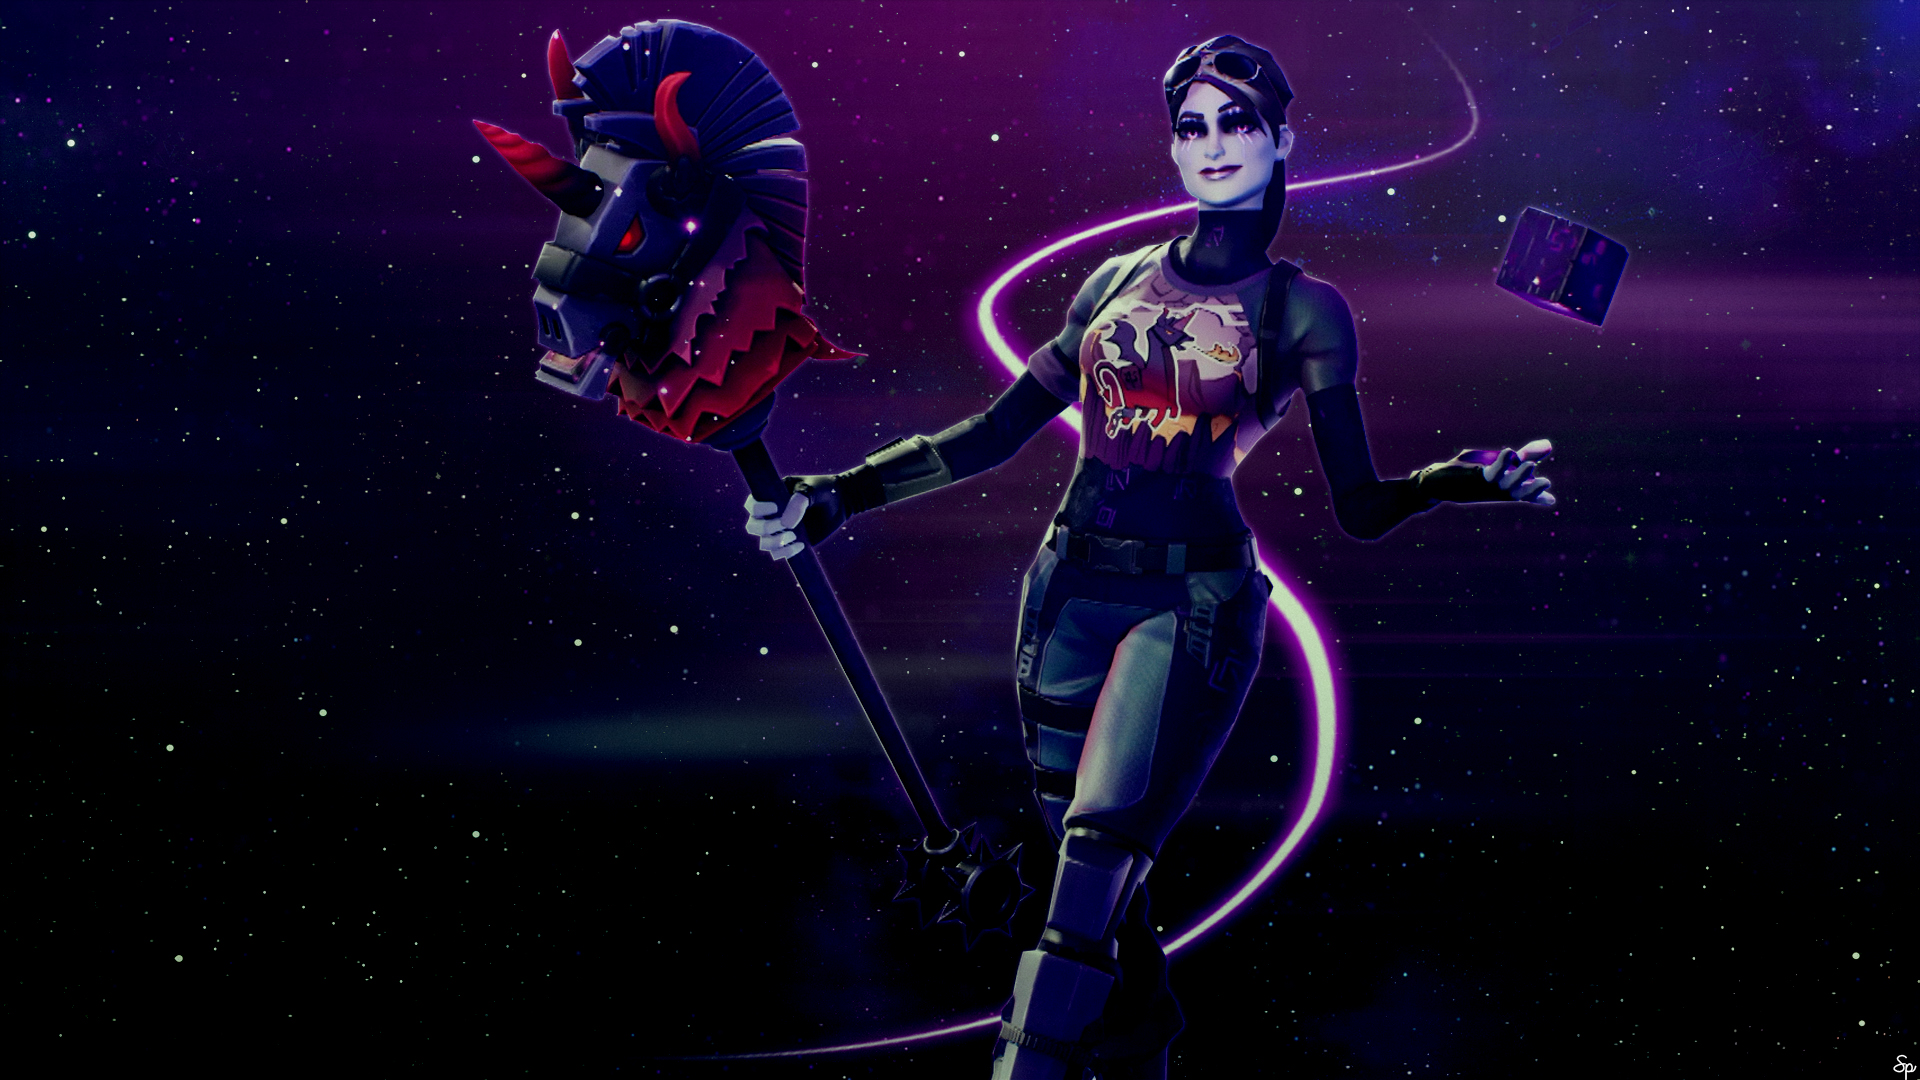 Battle Royale Wallpaper Dark Bomber Outfit by ImShadowWife Wallpaper and Free